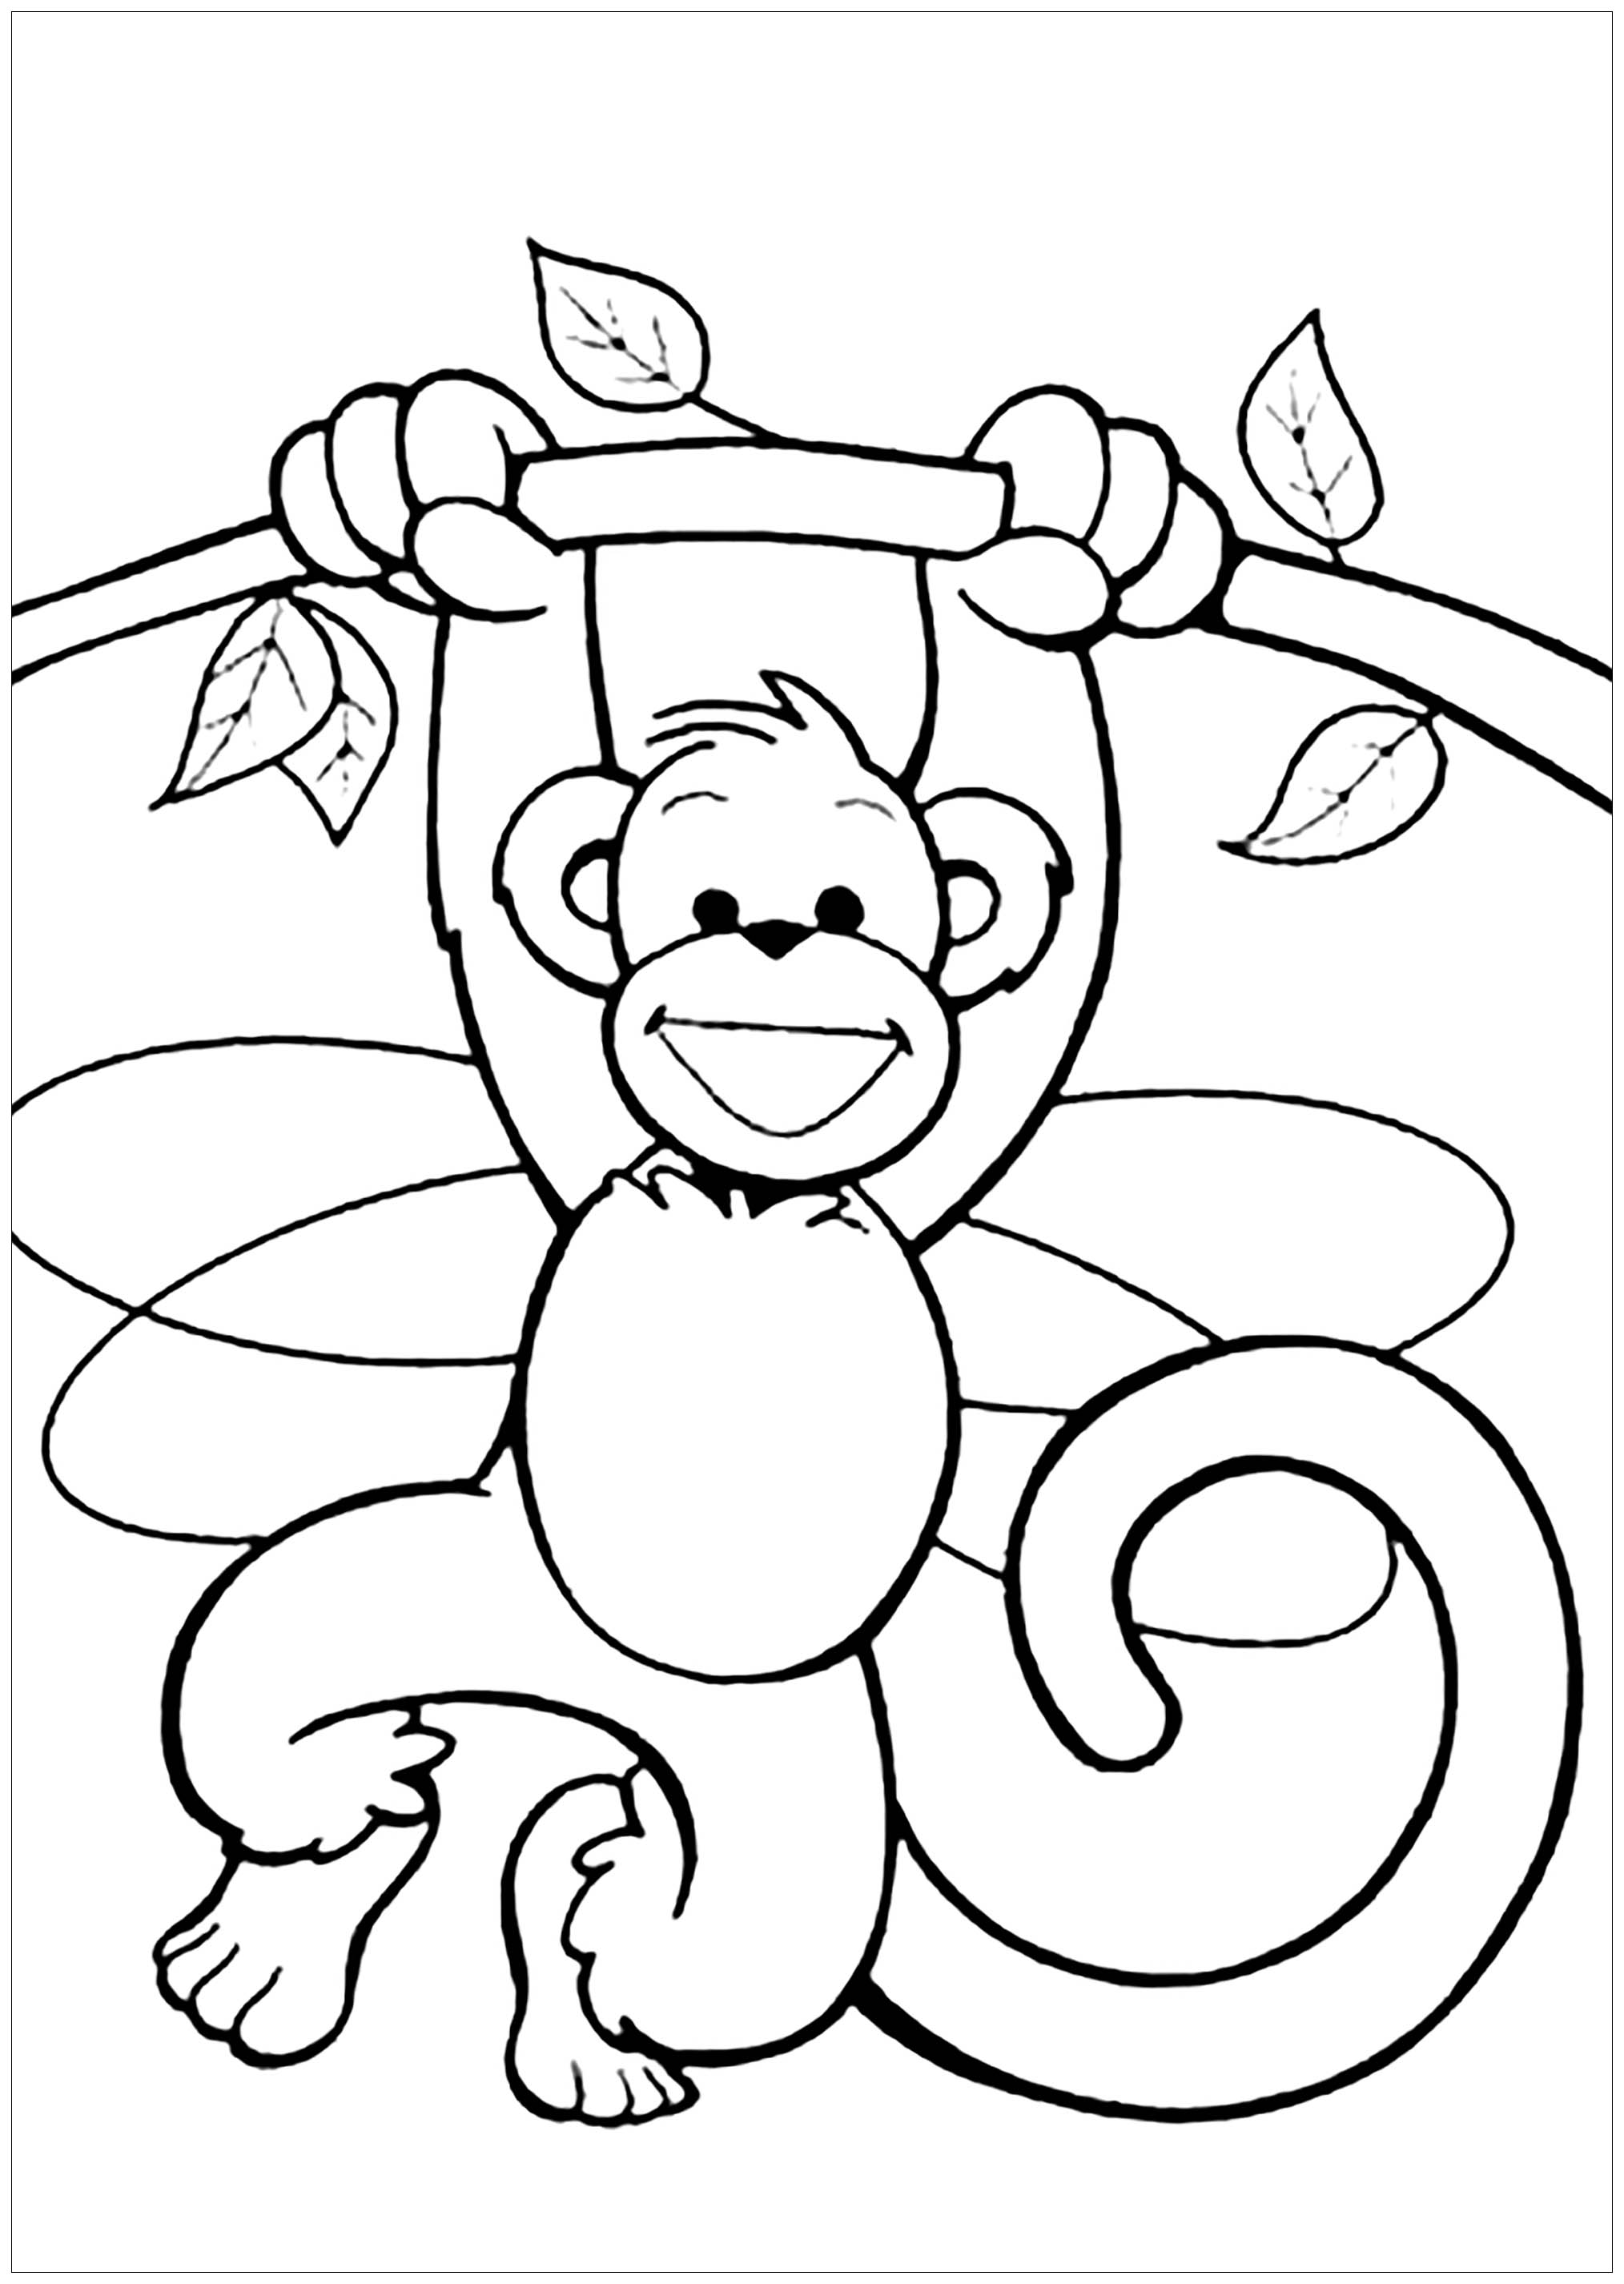 printable-pictures-of-monkeys